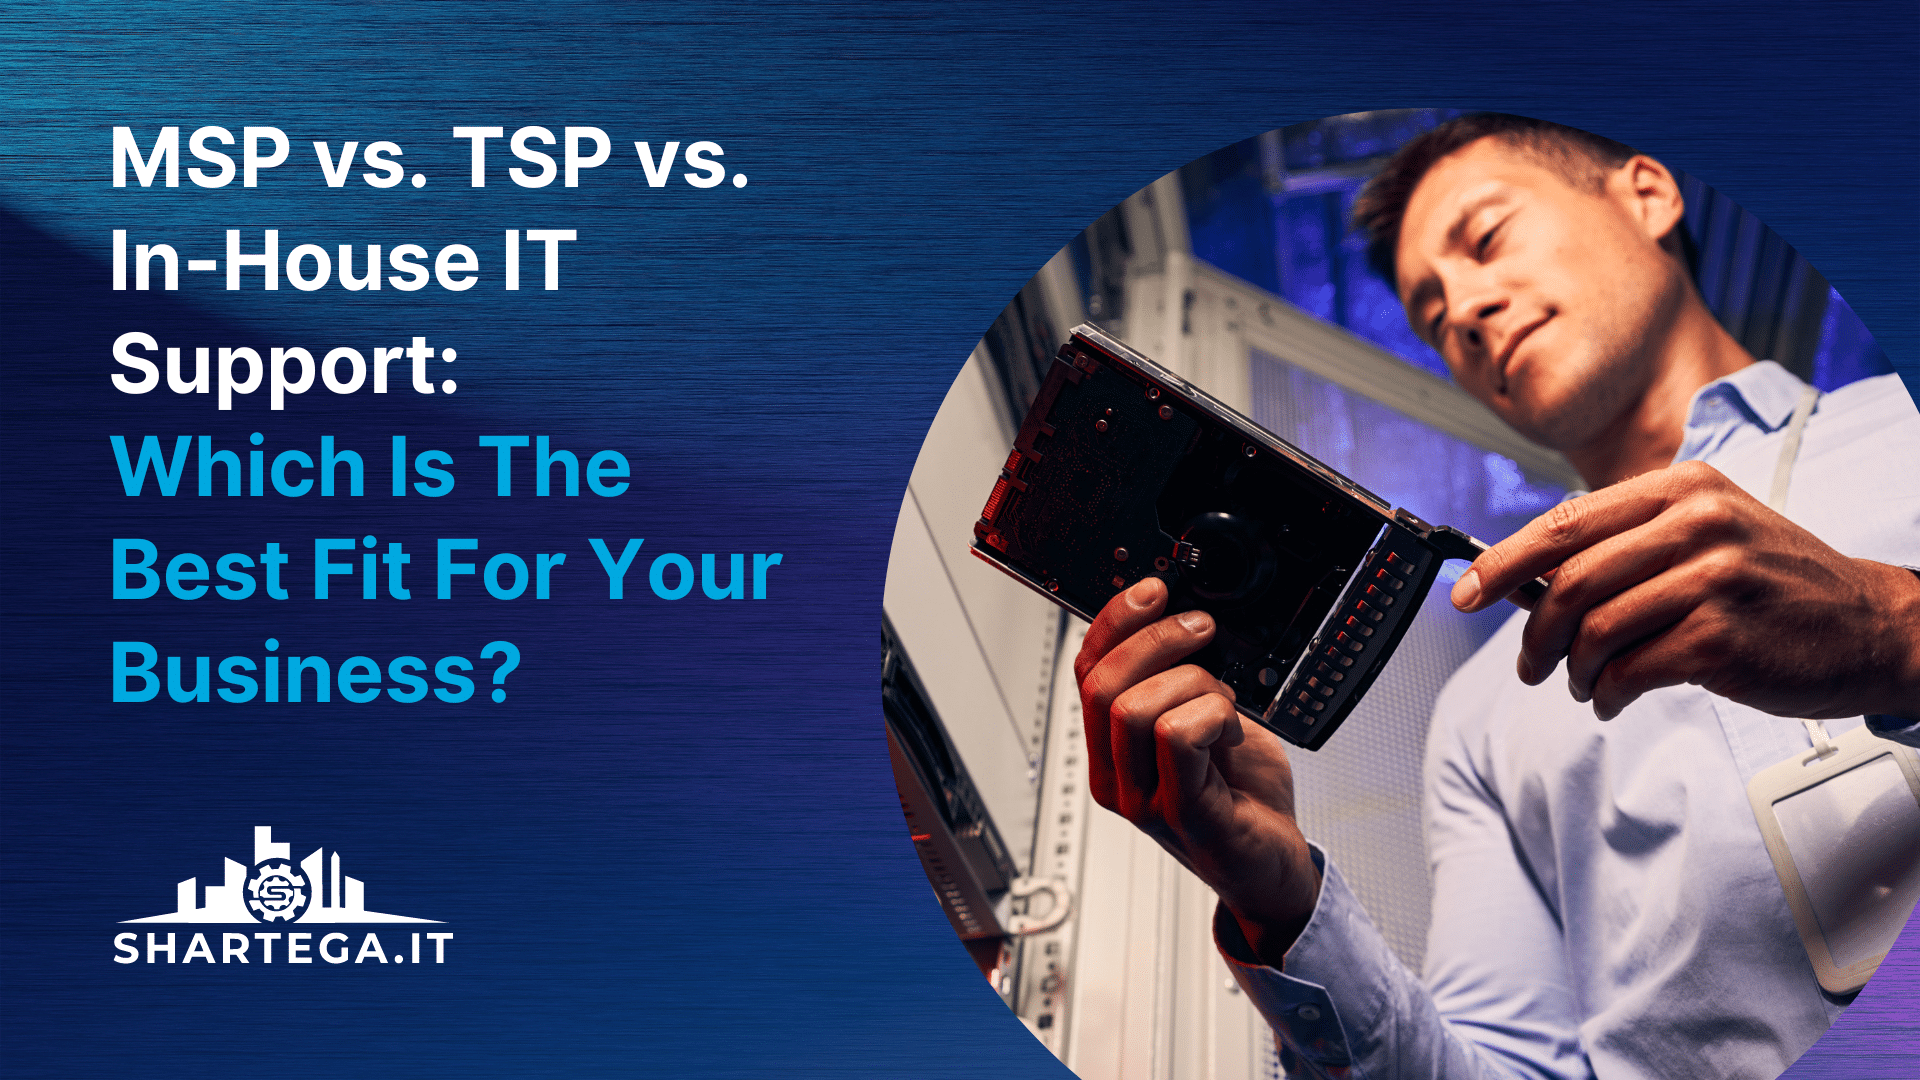 MSP vs TSP vs In-House IT Support Which is the Best Fit for Your Business